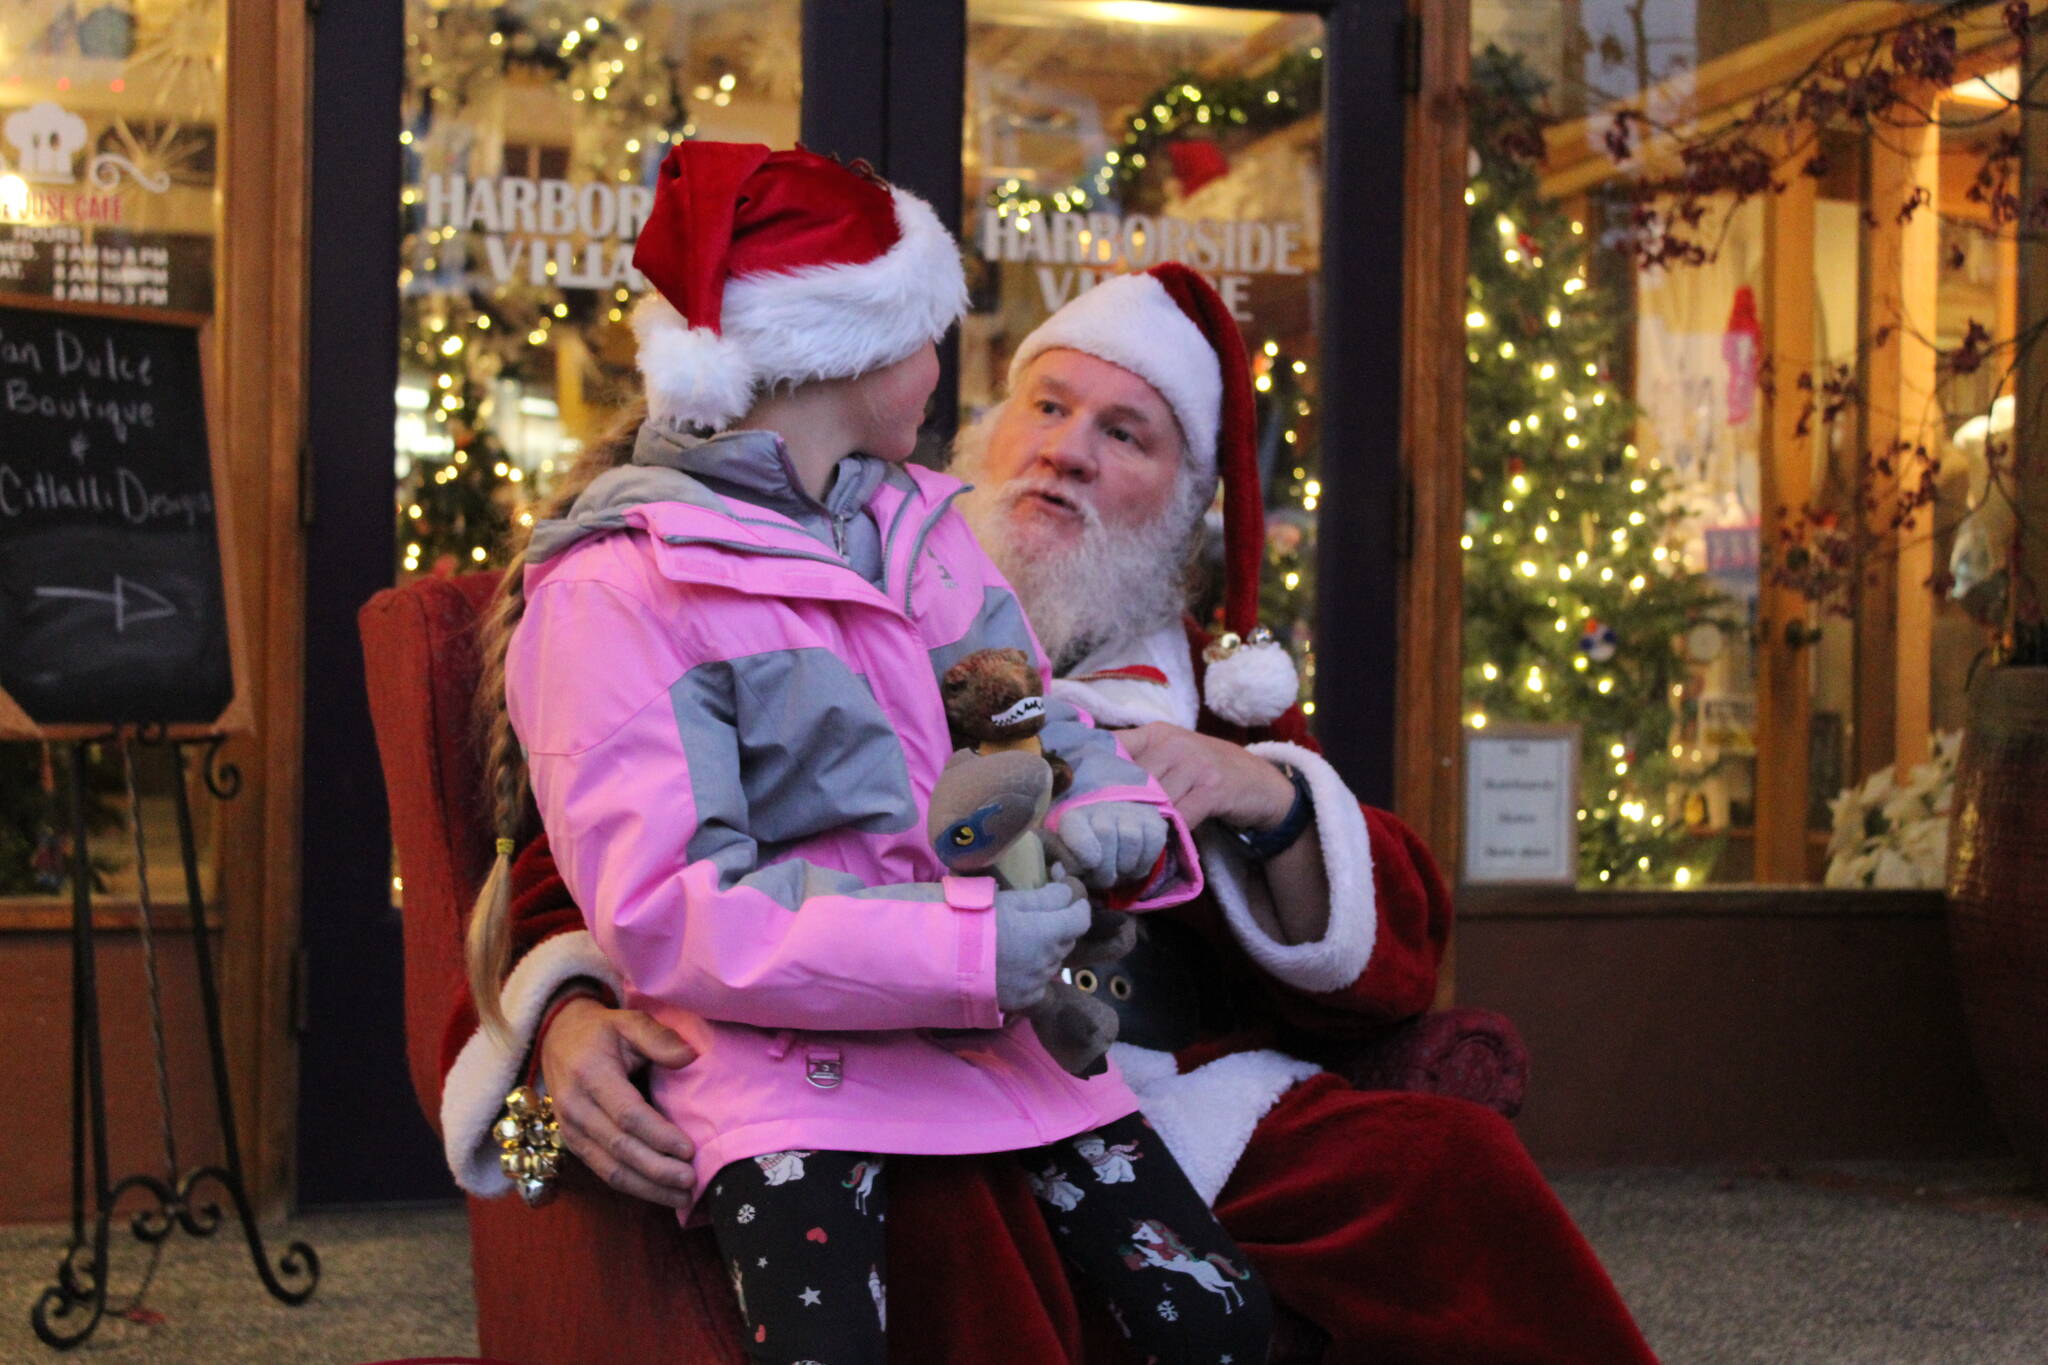 Photo by Karina Andrew/Whidbey News-Times
Lauren Vasileff, age 9, tells Santa what she wants for Christmas this year.